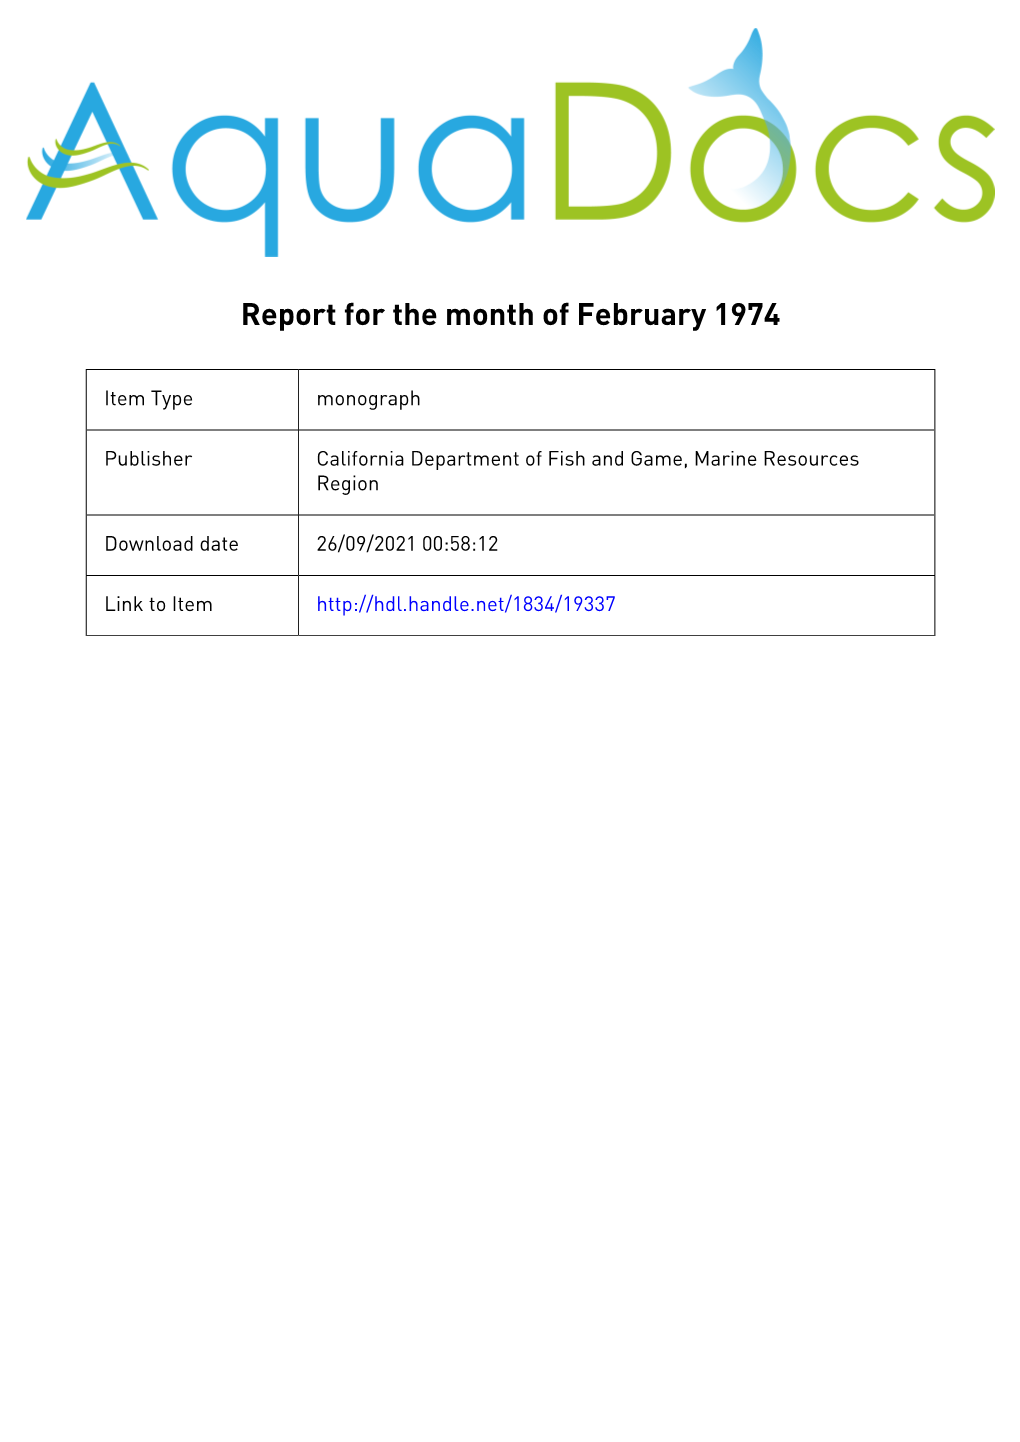 Report for the Month of February 1974